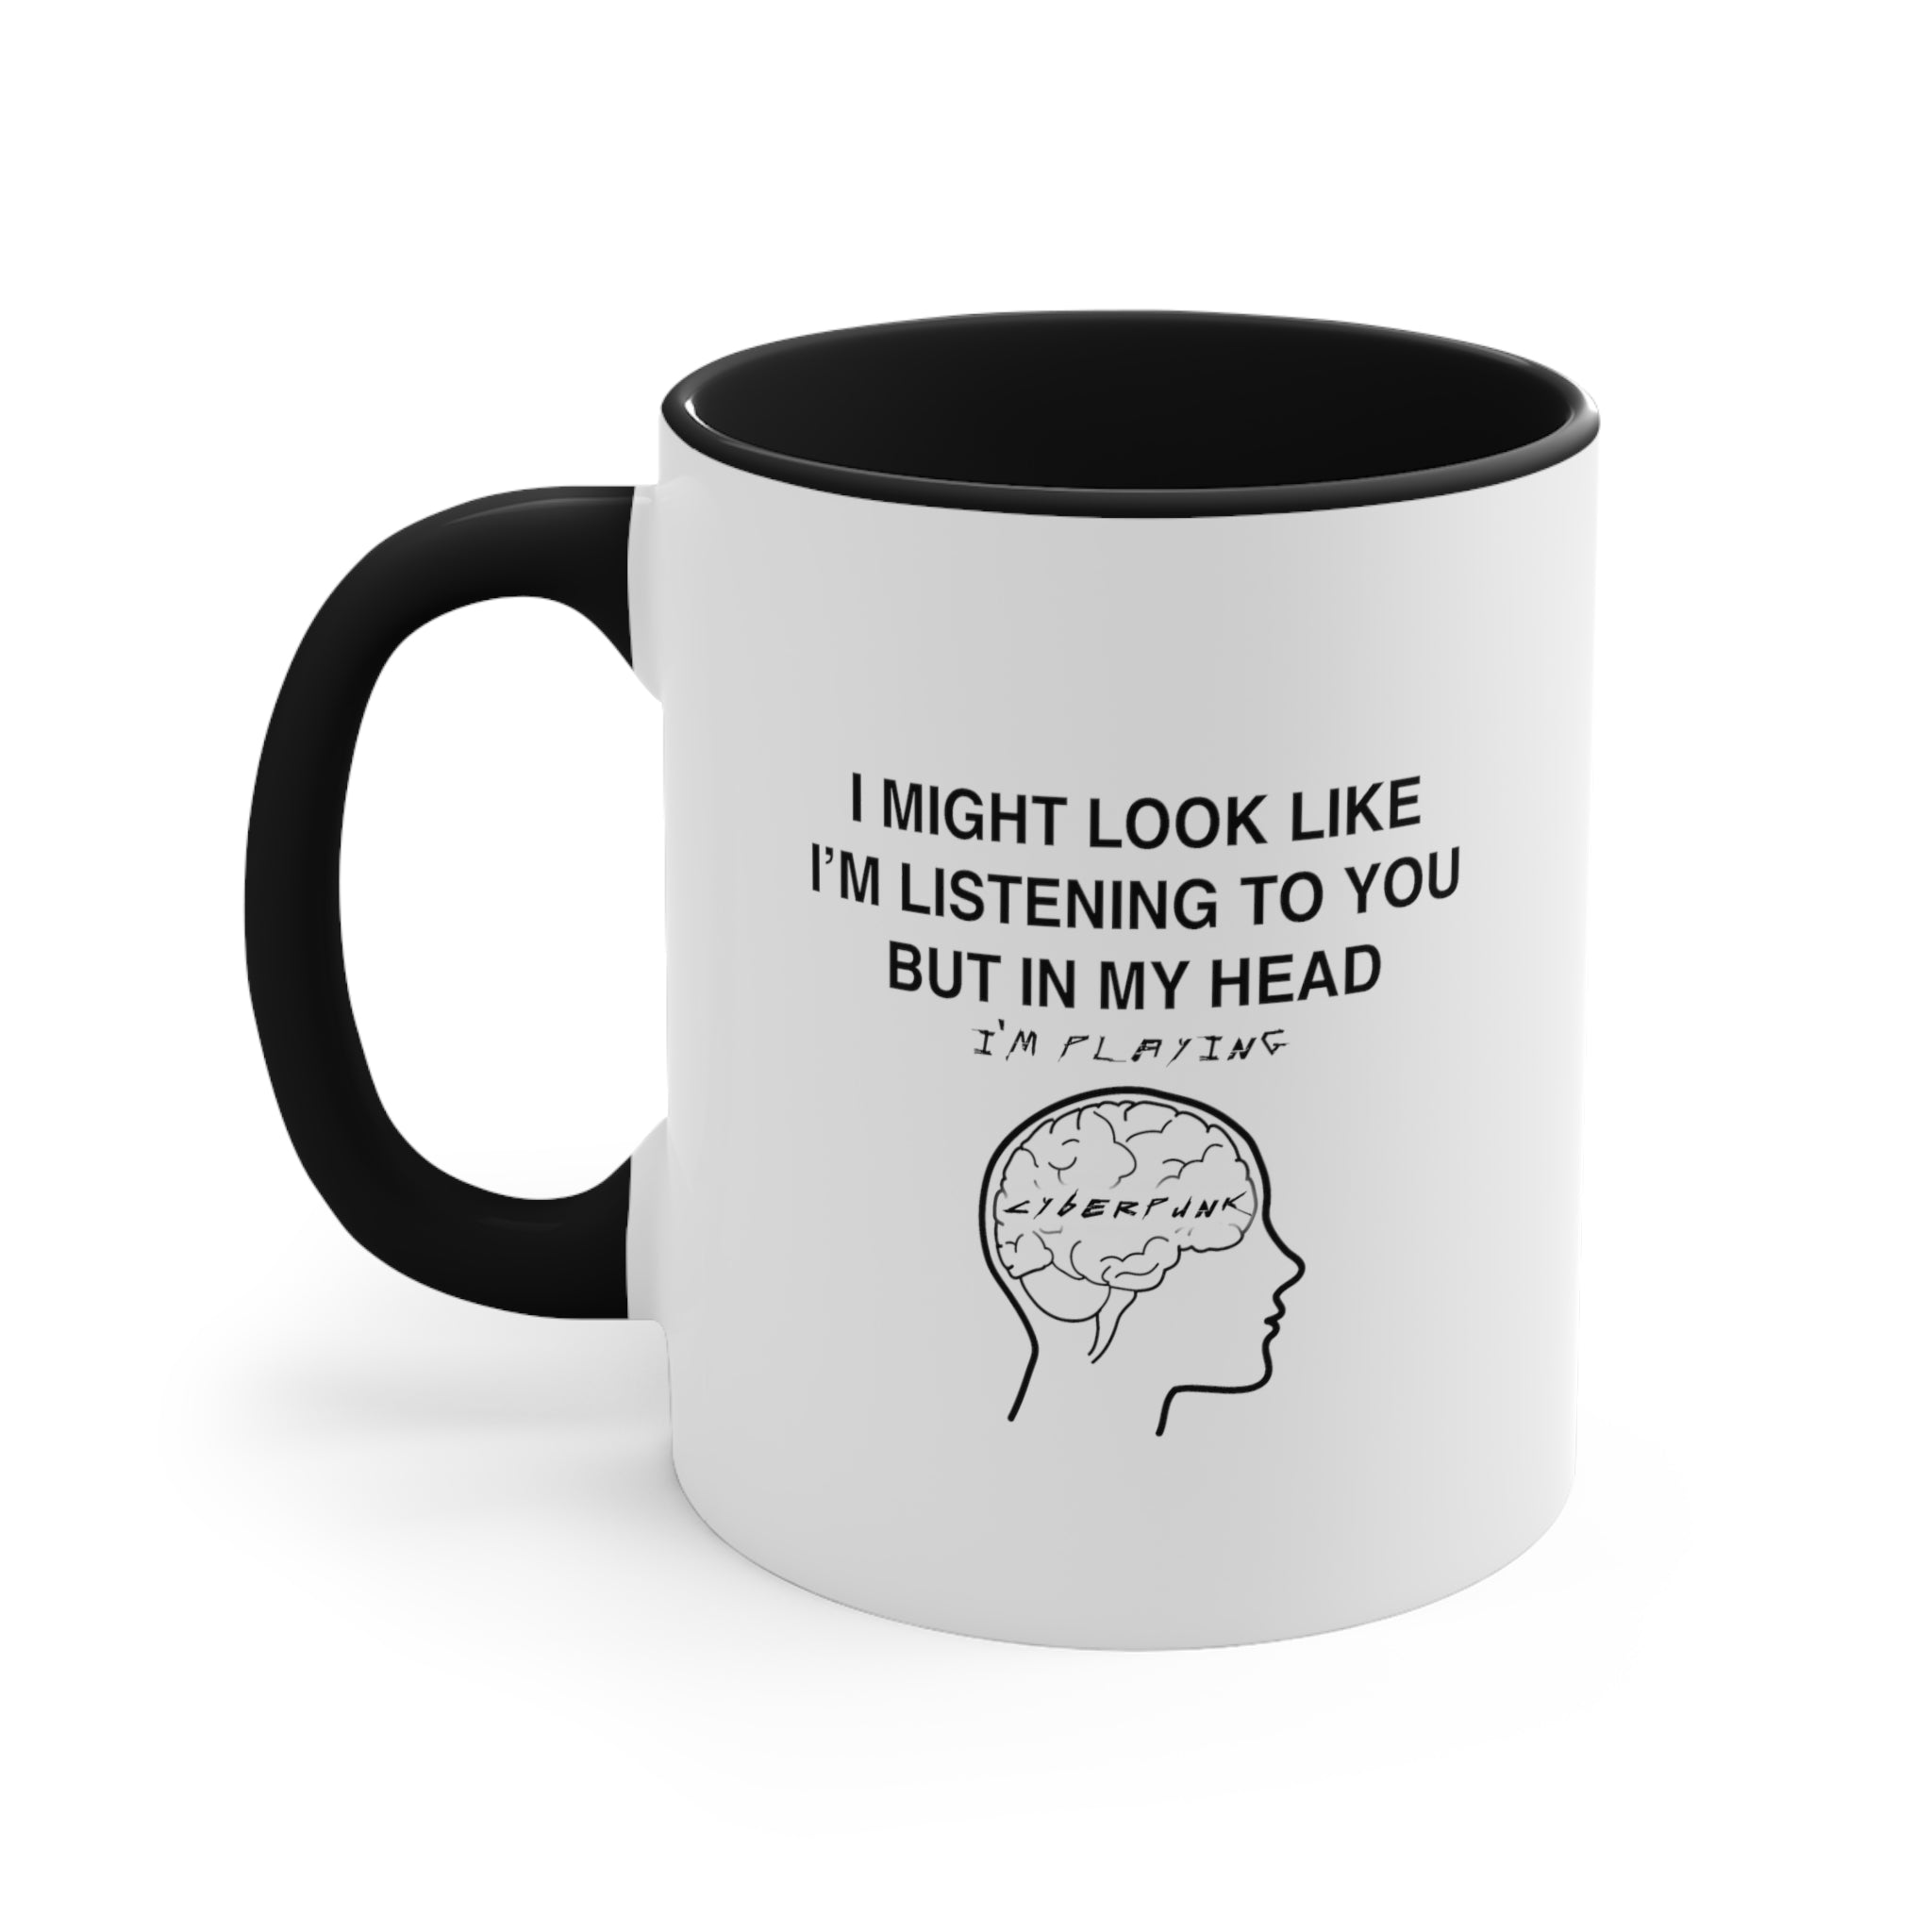 Cyberpunk 2077 Funny Coffee Mug, 11oz I Might Look Like I'm Listening Cups Mugs Cup Gamer Gift For Him Her Game Cup Cups Mugs Birthday Christmas Valentine's Anniversary Gifts